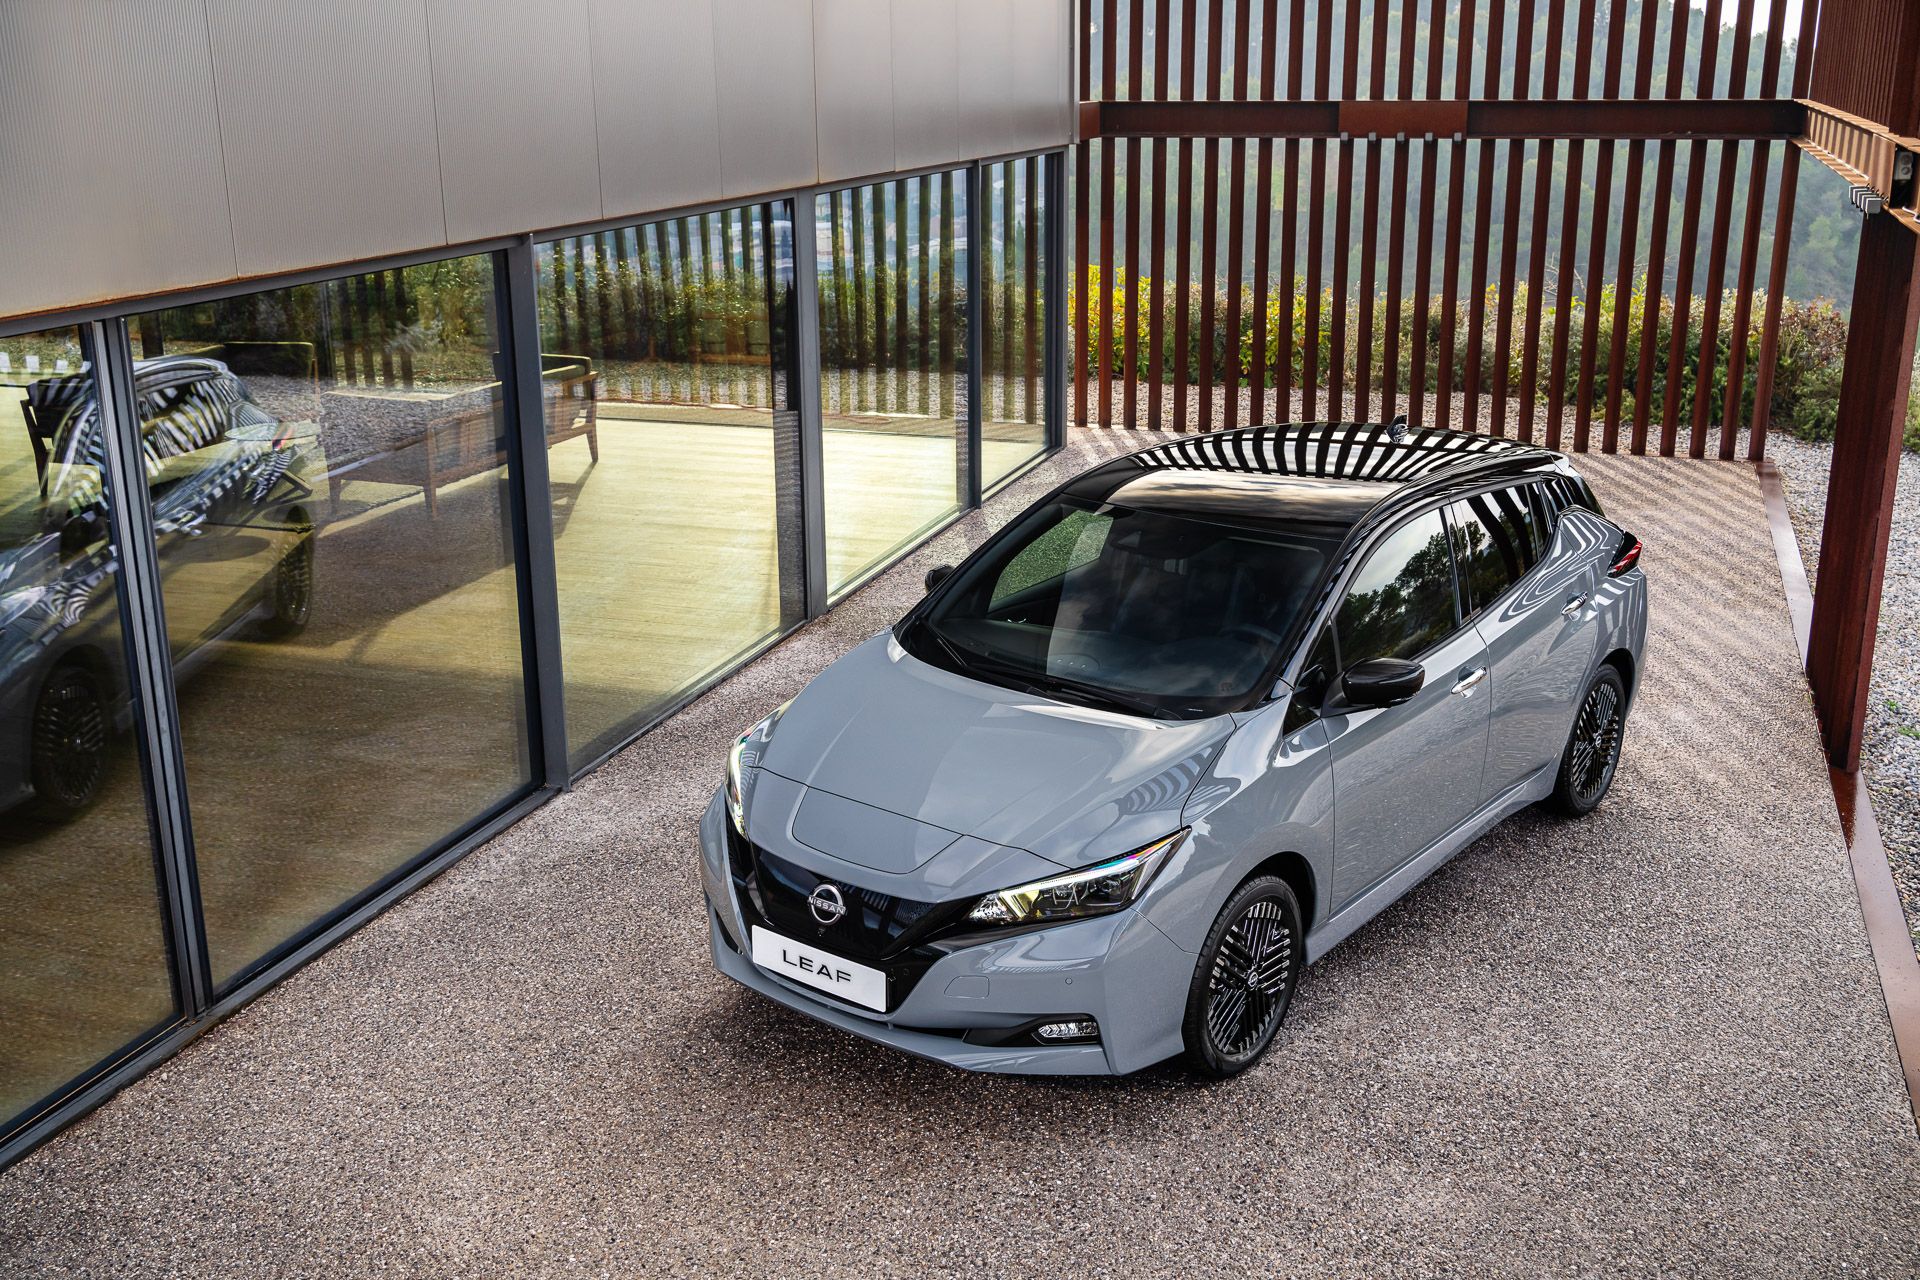 2023 Nissan Leaf in grey with black contrasting roof